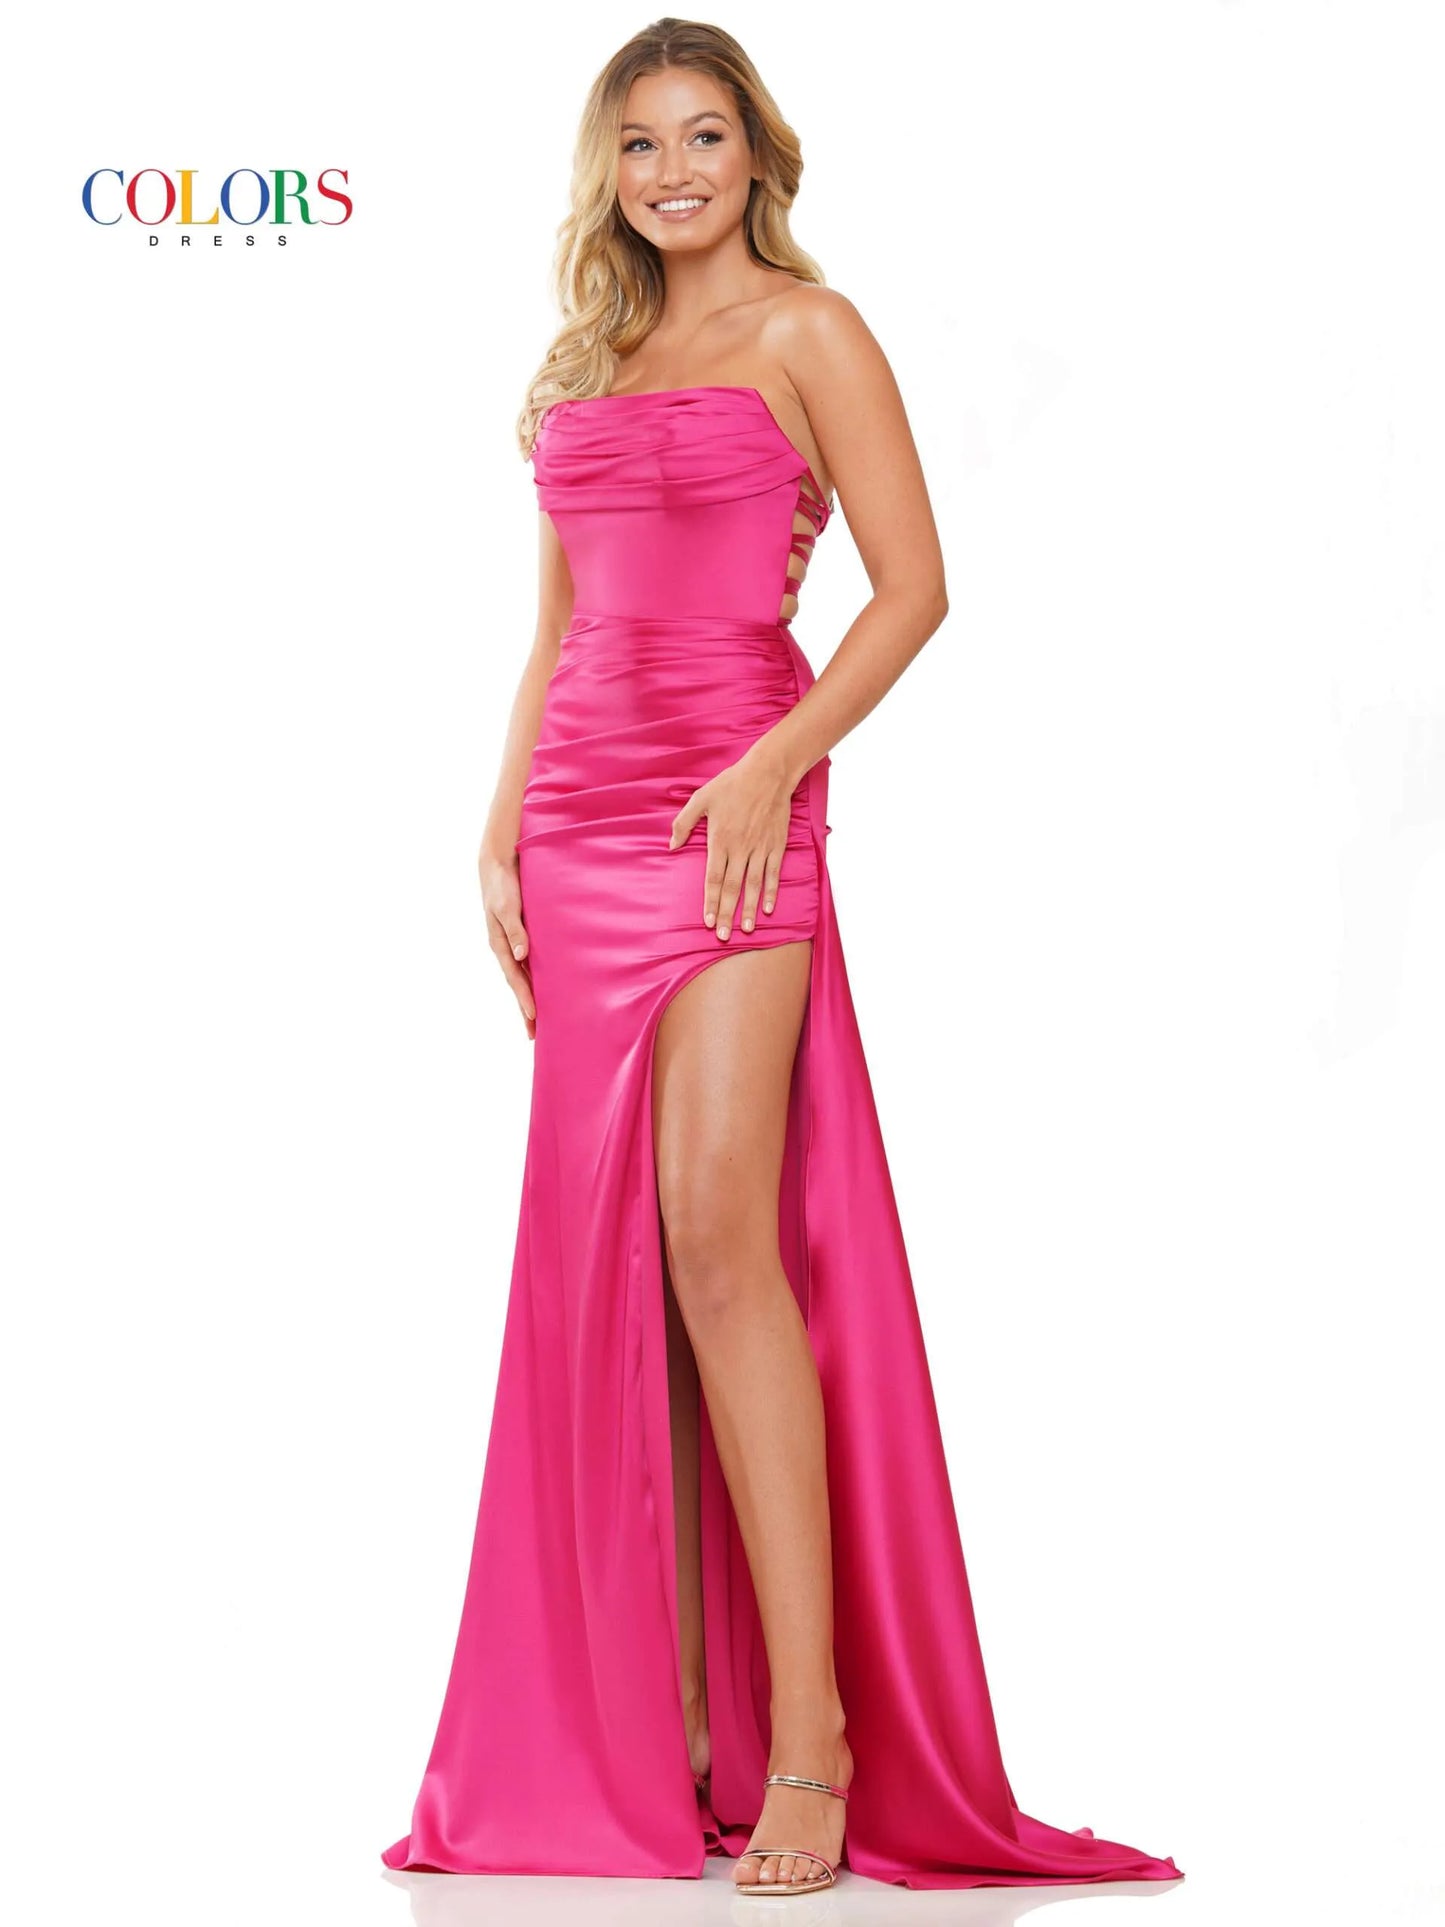 Enhance your formal look with the Colors Dress 2968 Long Prom Dress. The fitted satin design flatters your figure while the high slit adds a touch of elegance. With ruching details and a formal pageant gown style, you'll make a stylish statement at any event.